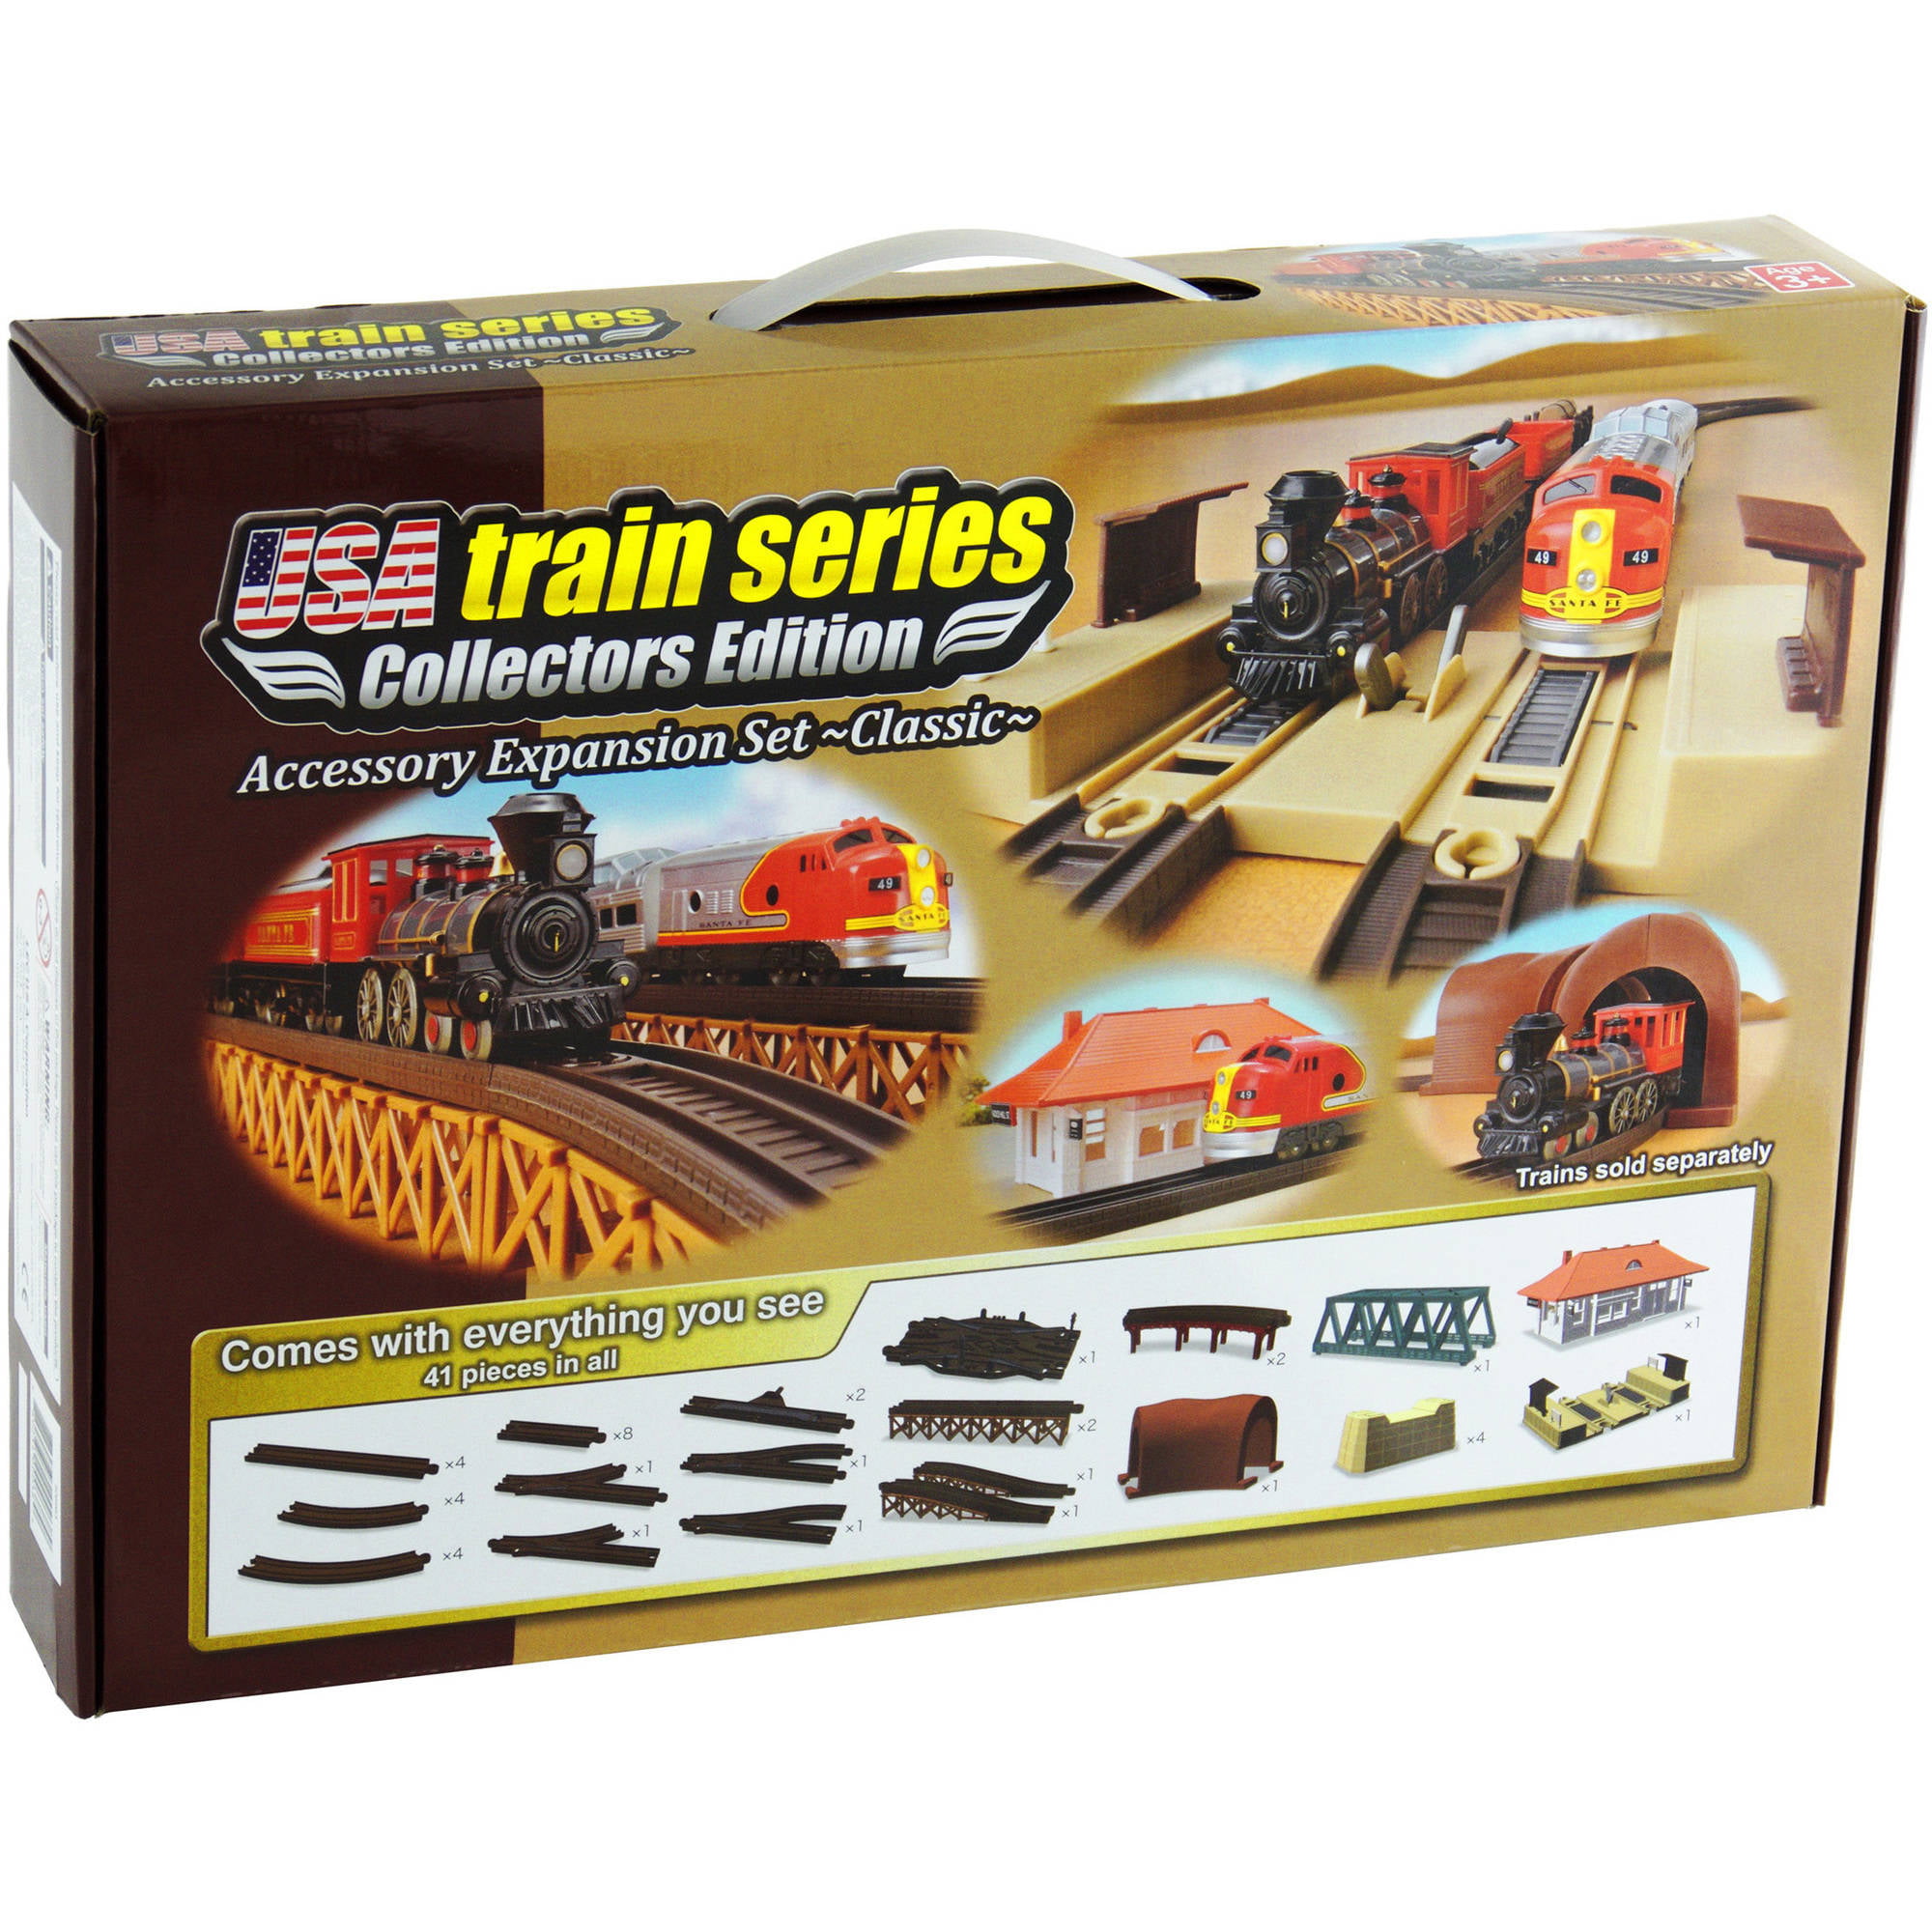 Train Track Grey 16 2 Lines Crossing Pt Track No Train Series Battery Operated Train Accessory 4Piece LEC U.S.A 